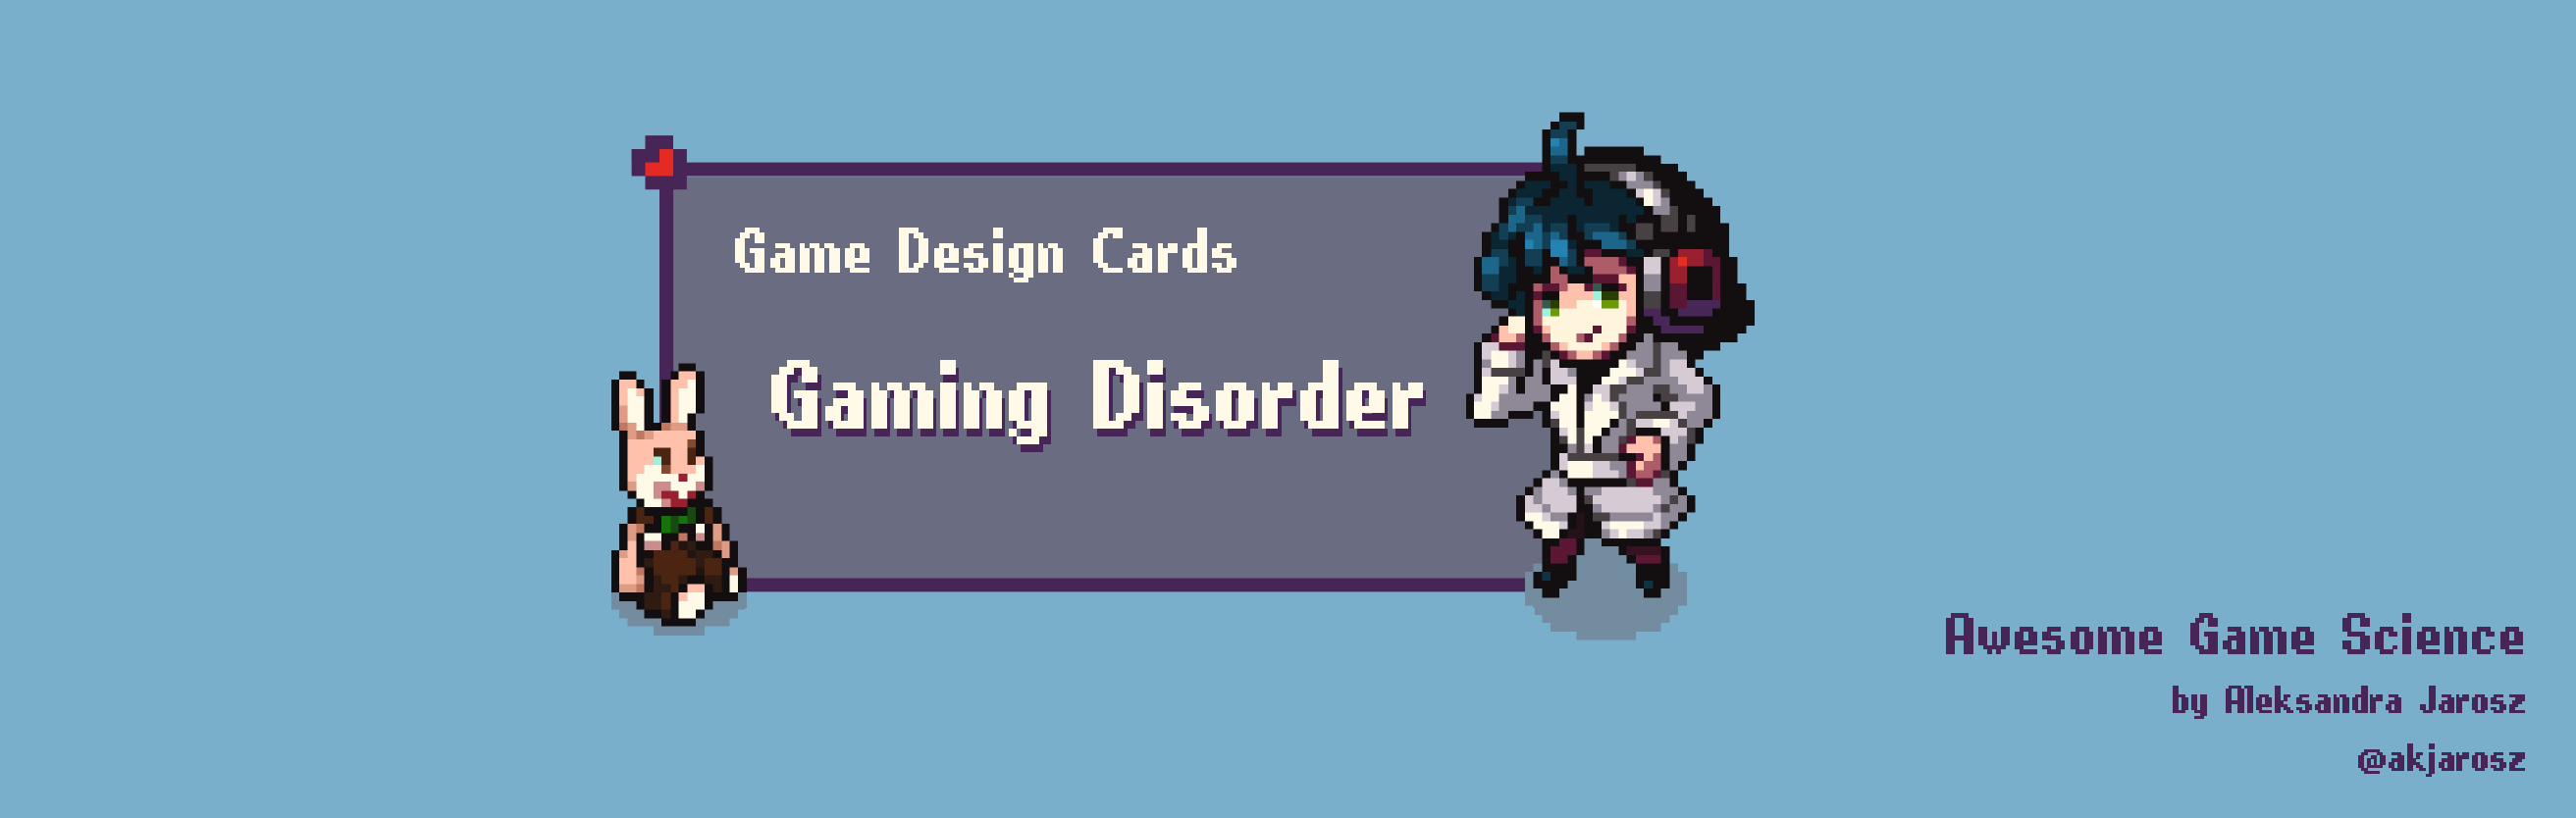 Awesome Game Science Cards - Gaming Disorder